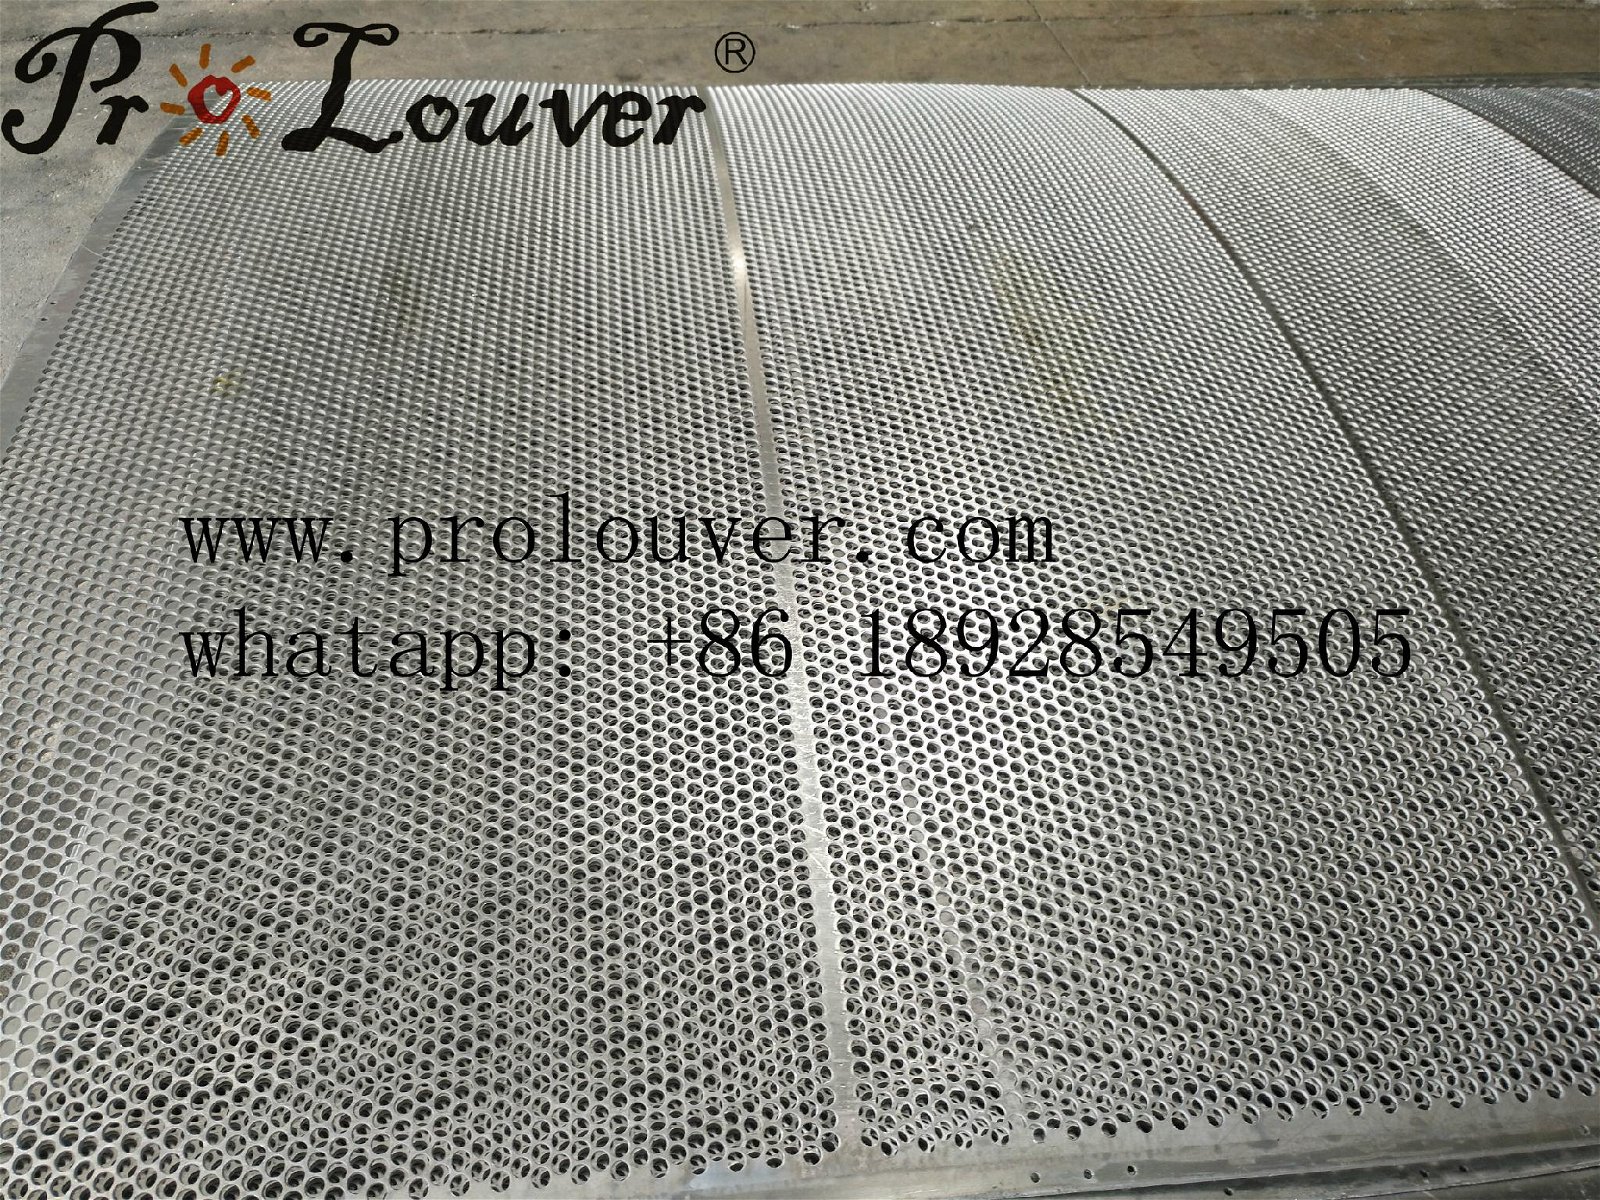 Anodized AkzoNobel powder coating PVDF perforated metal panel used for facade 4